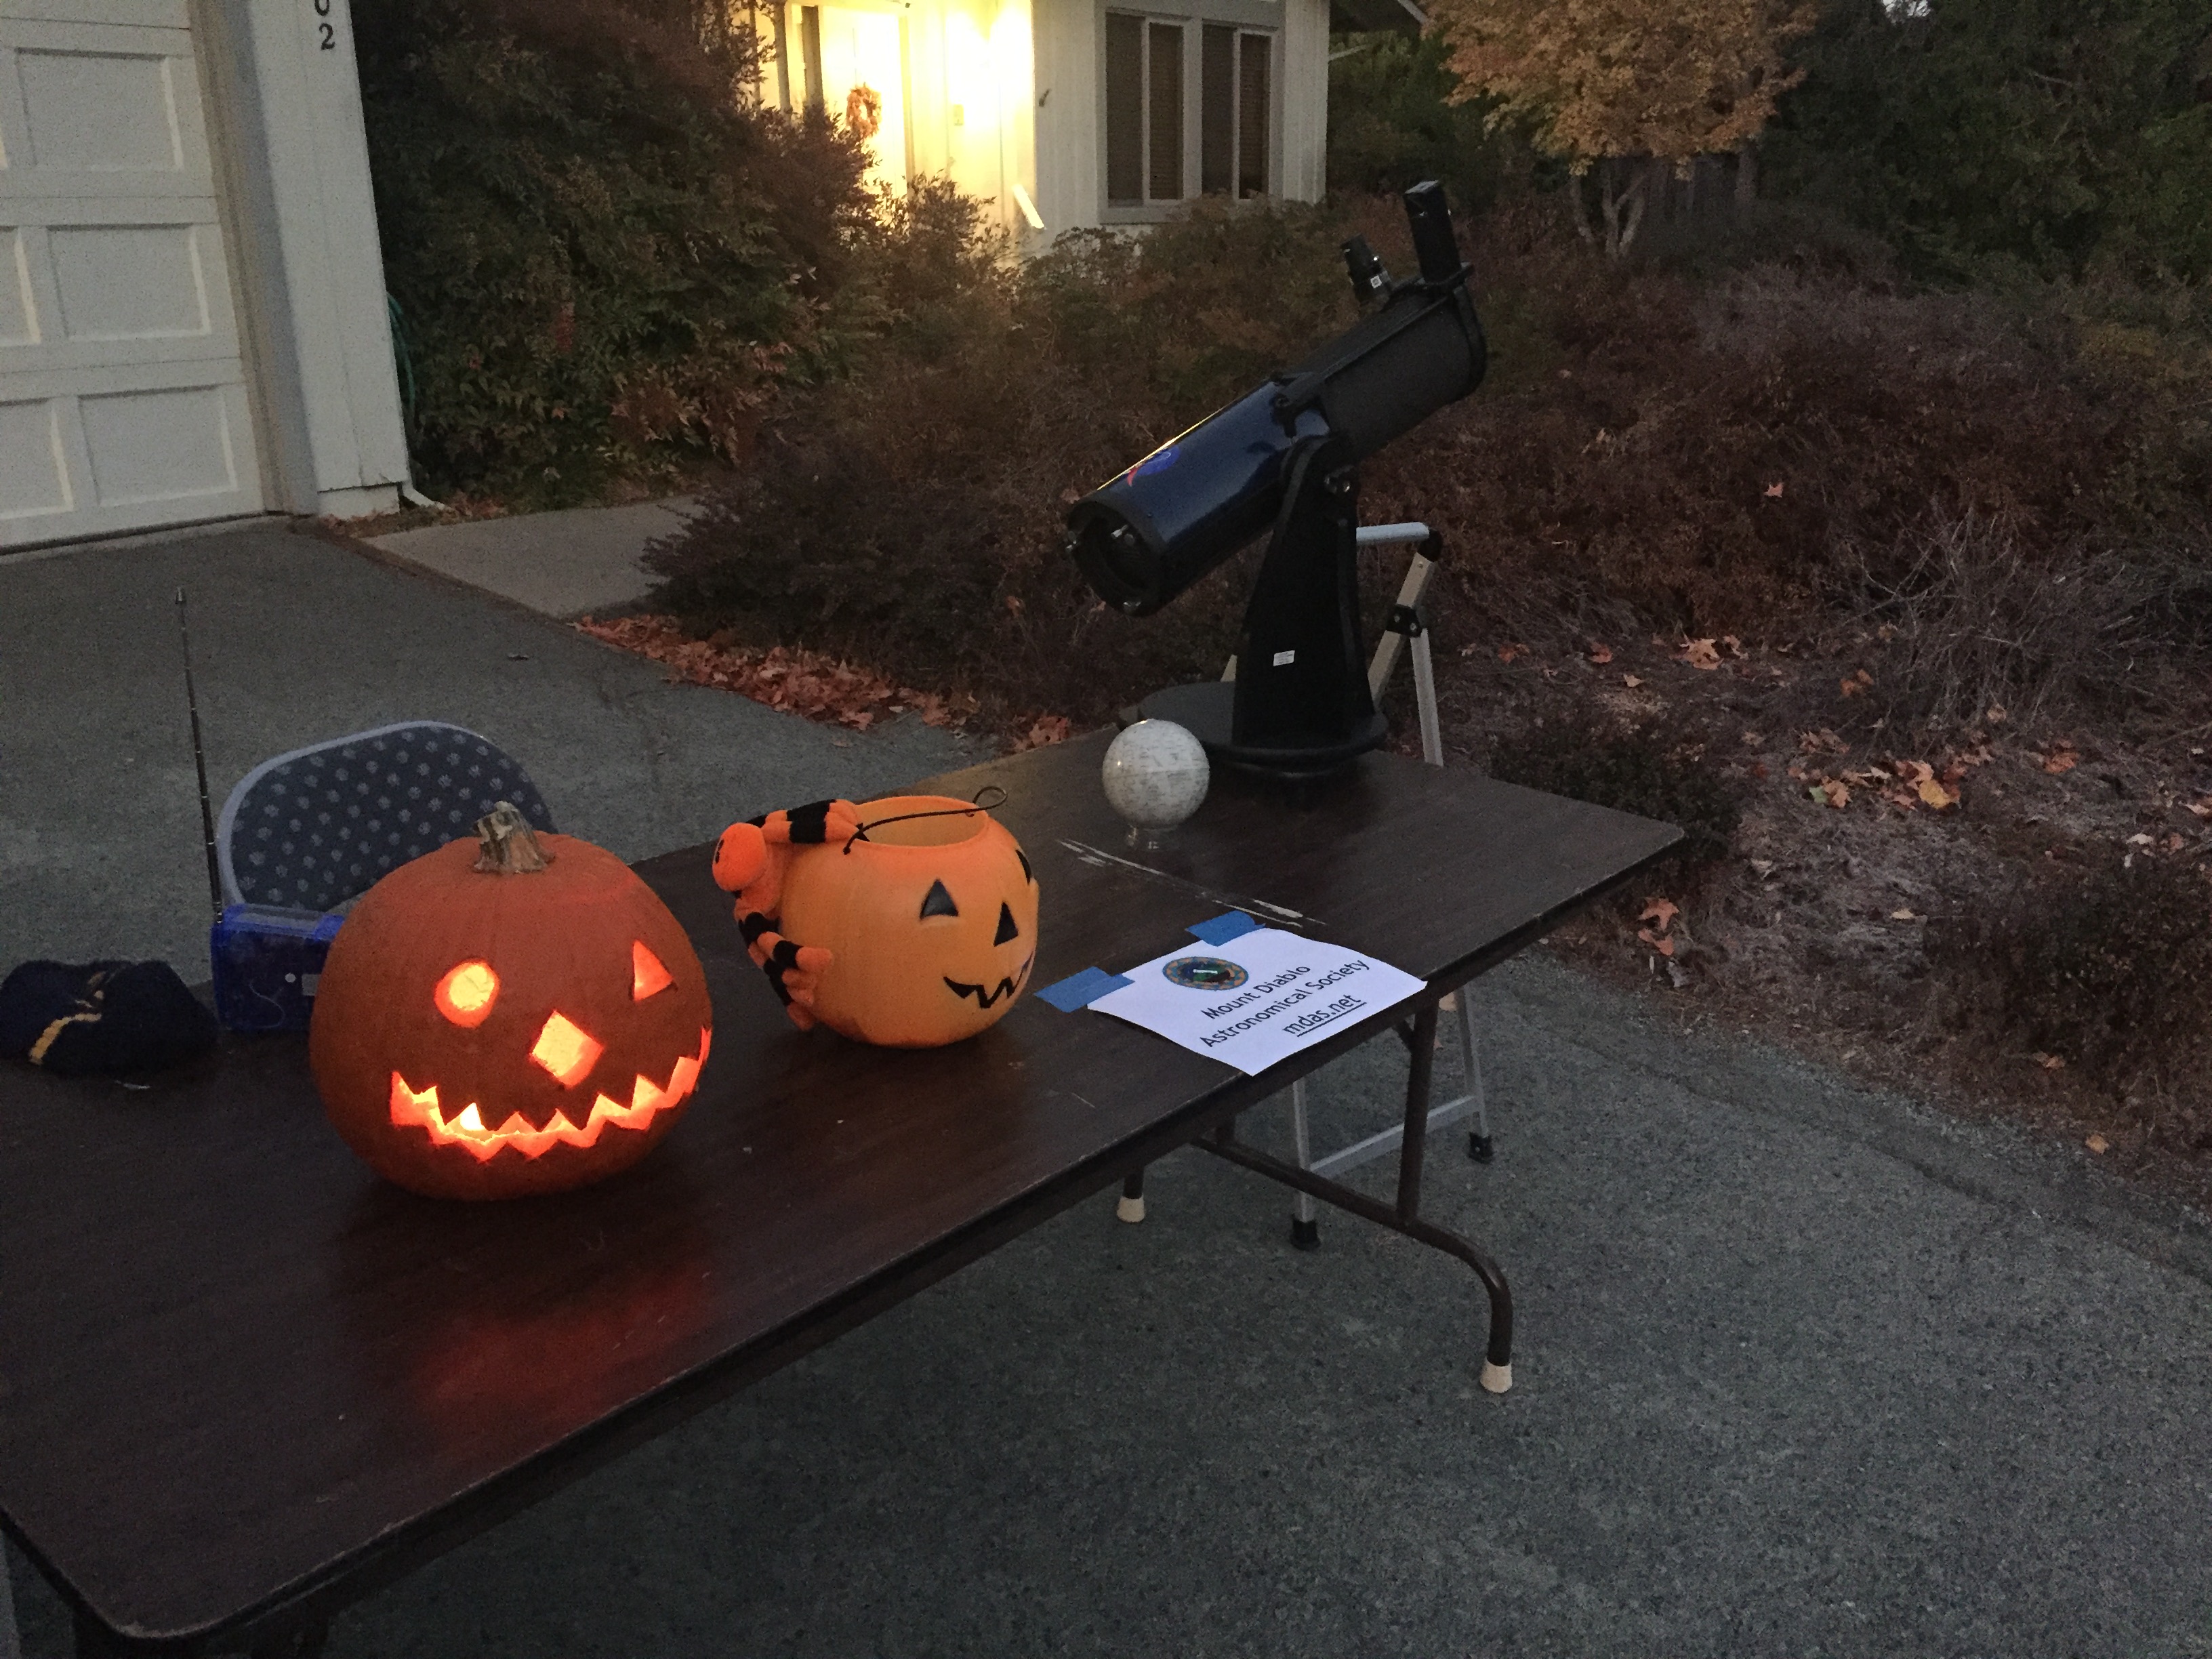 A black telescope set up on a brown table, next to two orange pumpkins